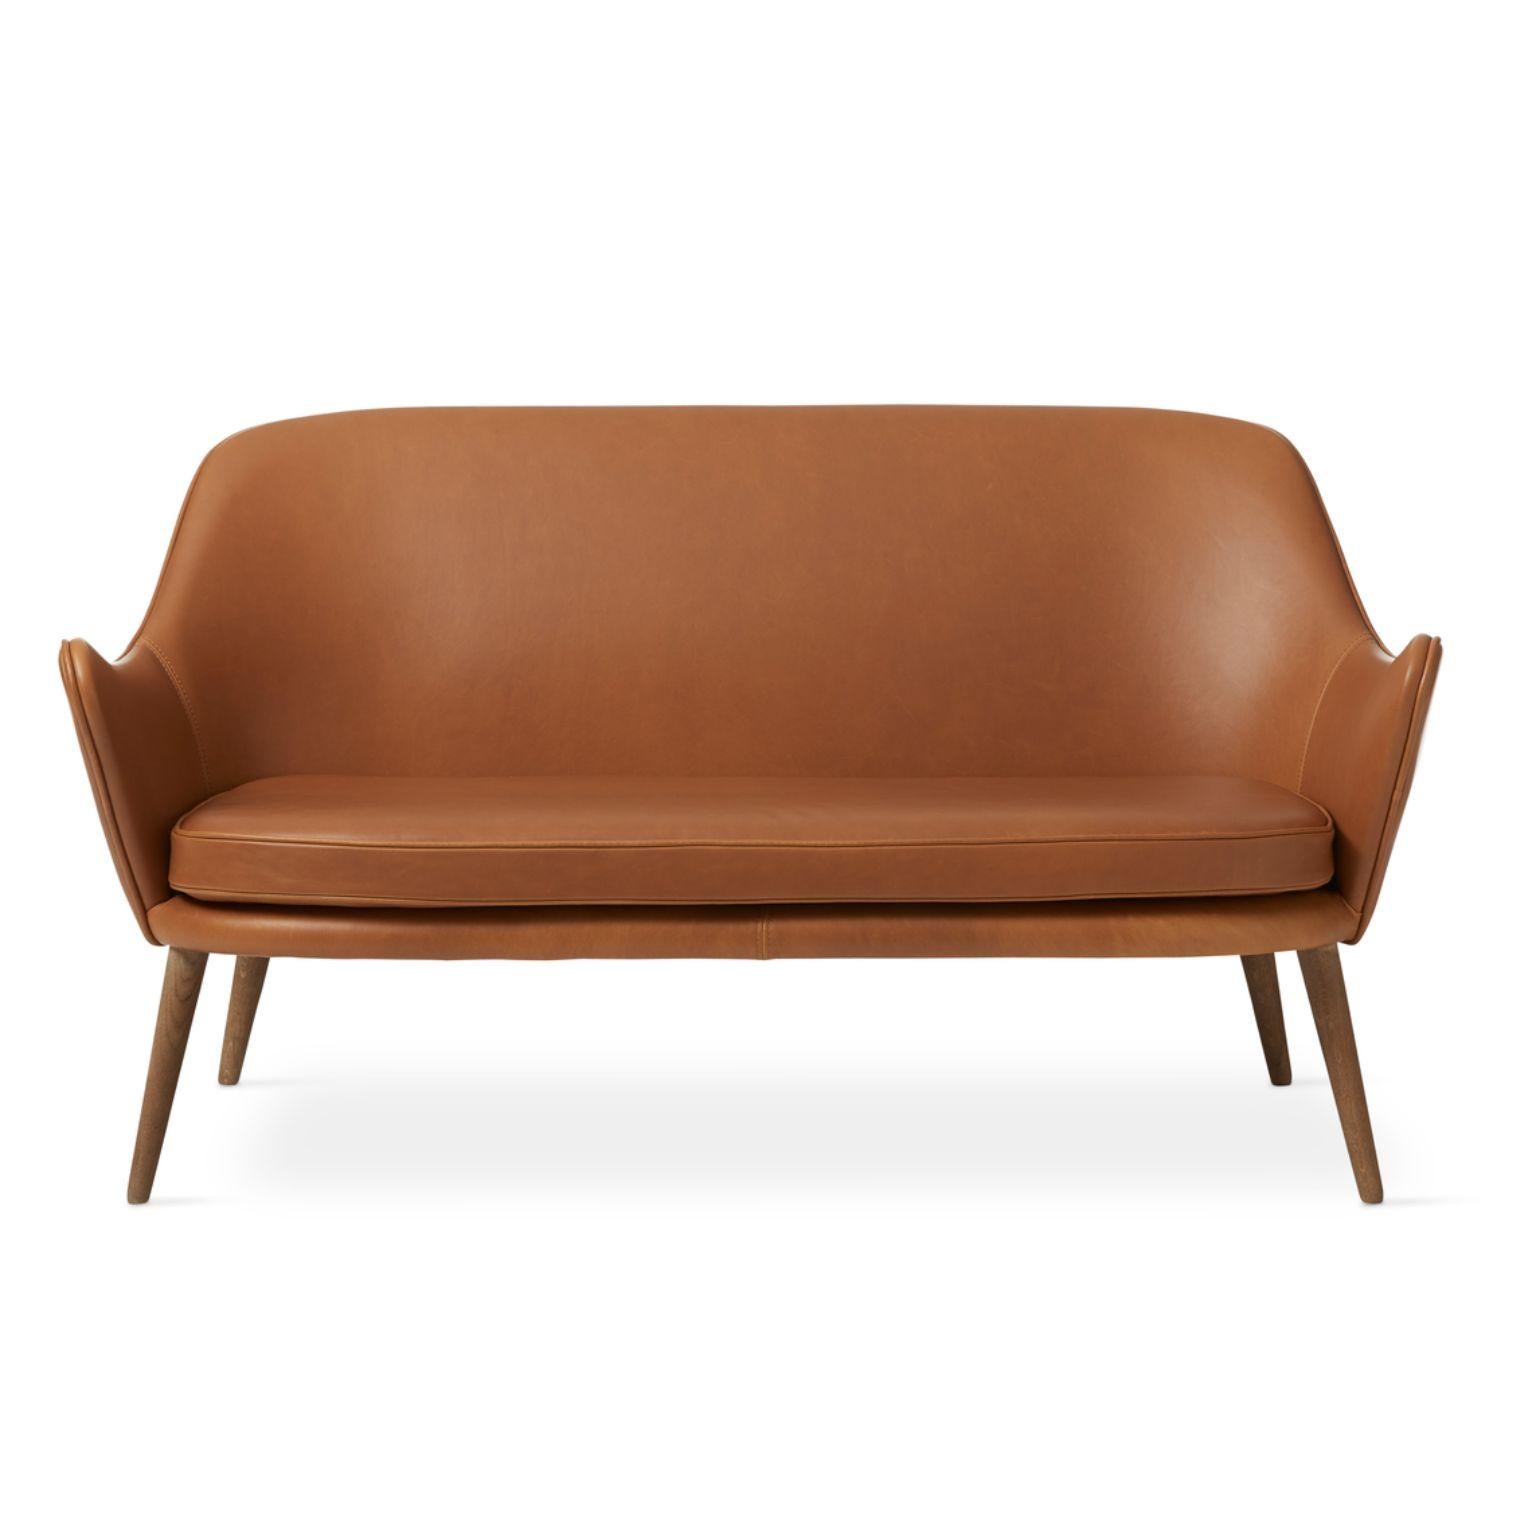 Dwell 2 seater silk camel by Warm Nordic
Dimensions: D137 x W66 x H 73 cm
Material: Leather upholstery, Solid smoked or white oiled oak legs, Wooden frame, foam, spring system.
Weight: 35 kg
Also available in different colours and finishes.